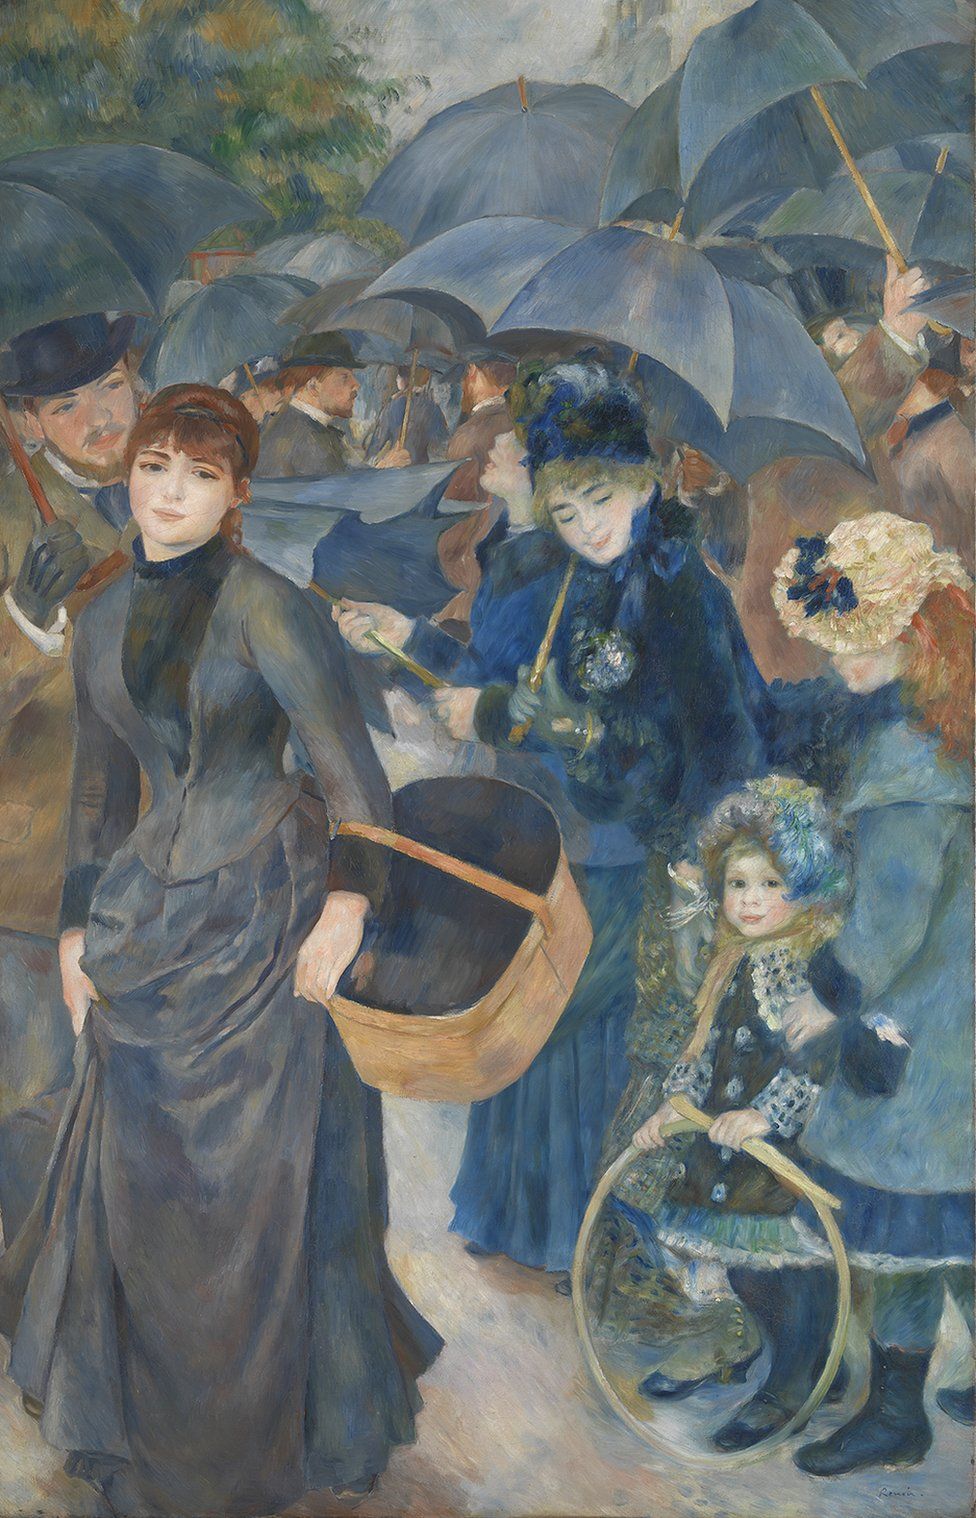 The Umbrellas by Renoir (circa 1881) is among the 12 paintings that will be lent to another institution in the UK